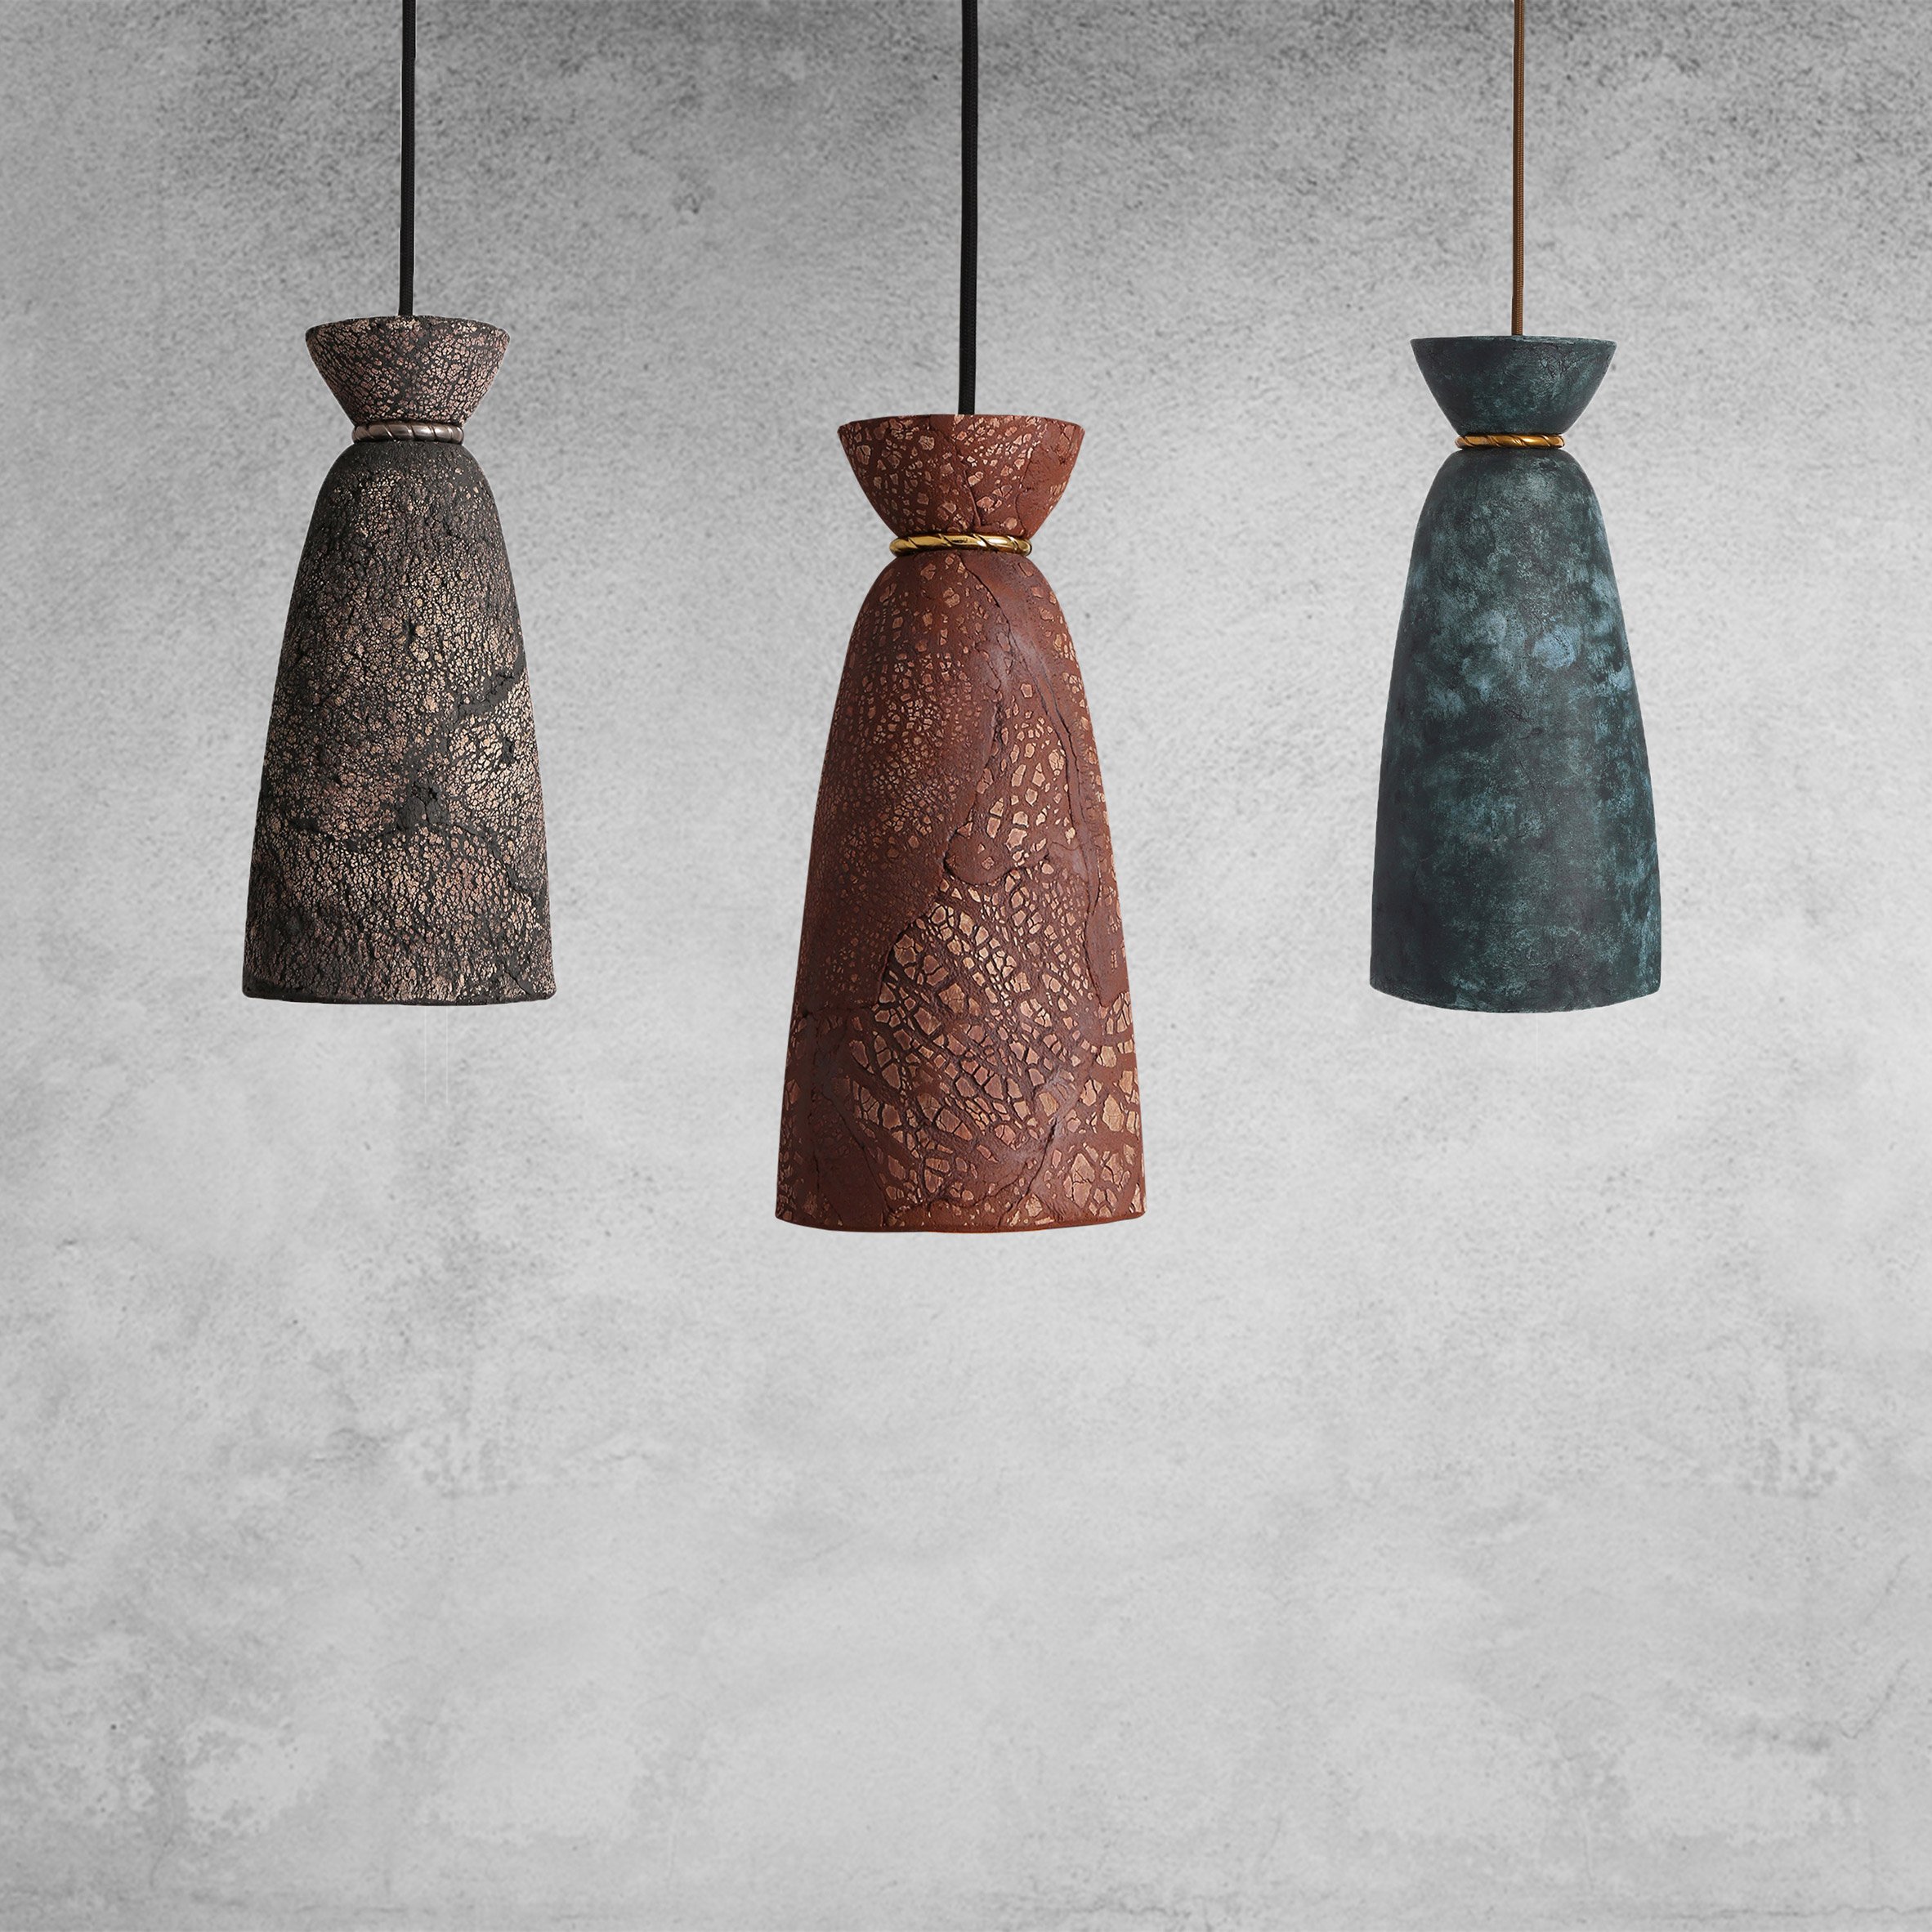 Pando pendant by Mullan Lighting in red iron, blue earth and black clay